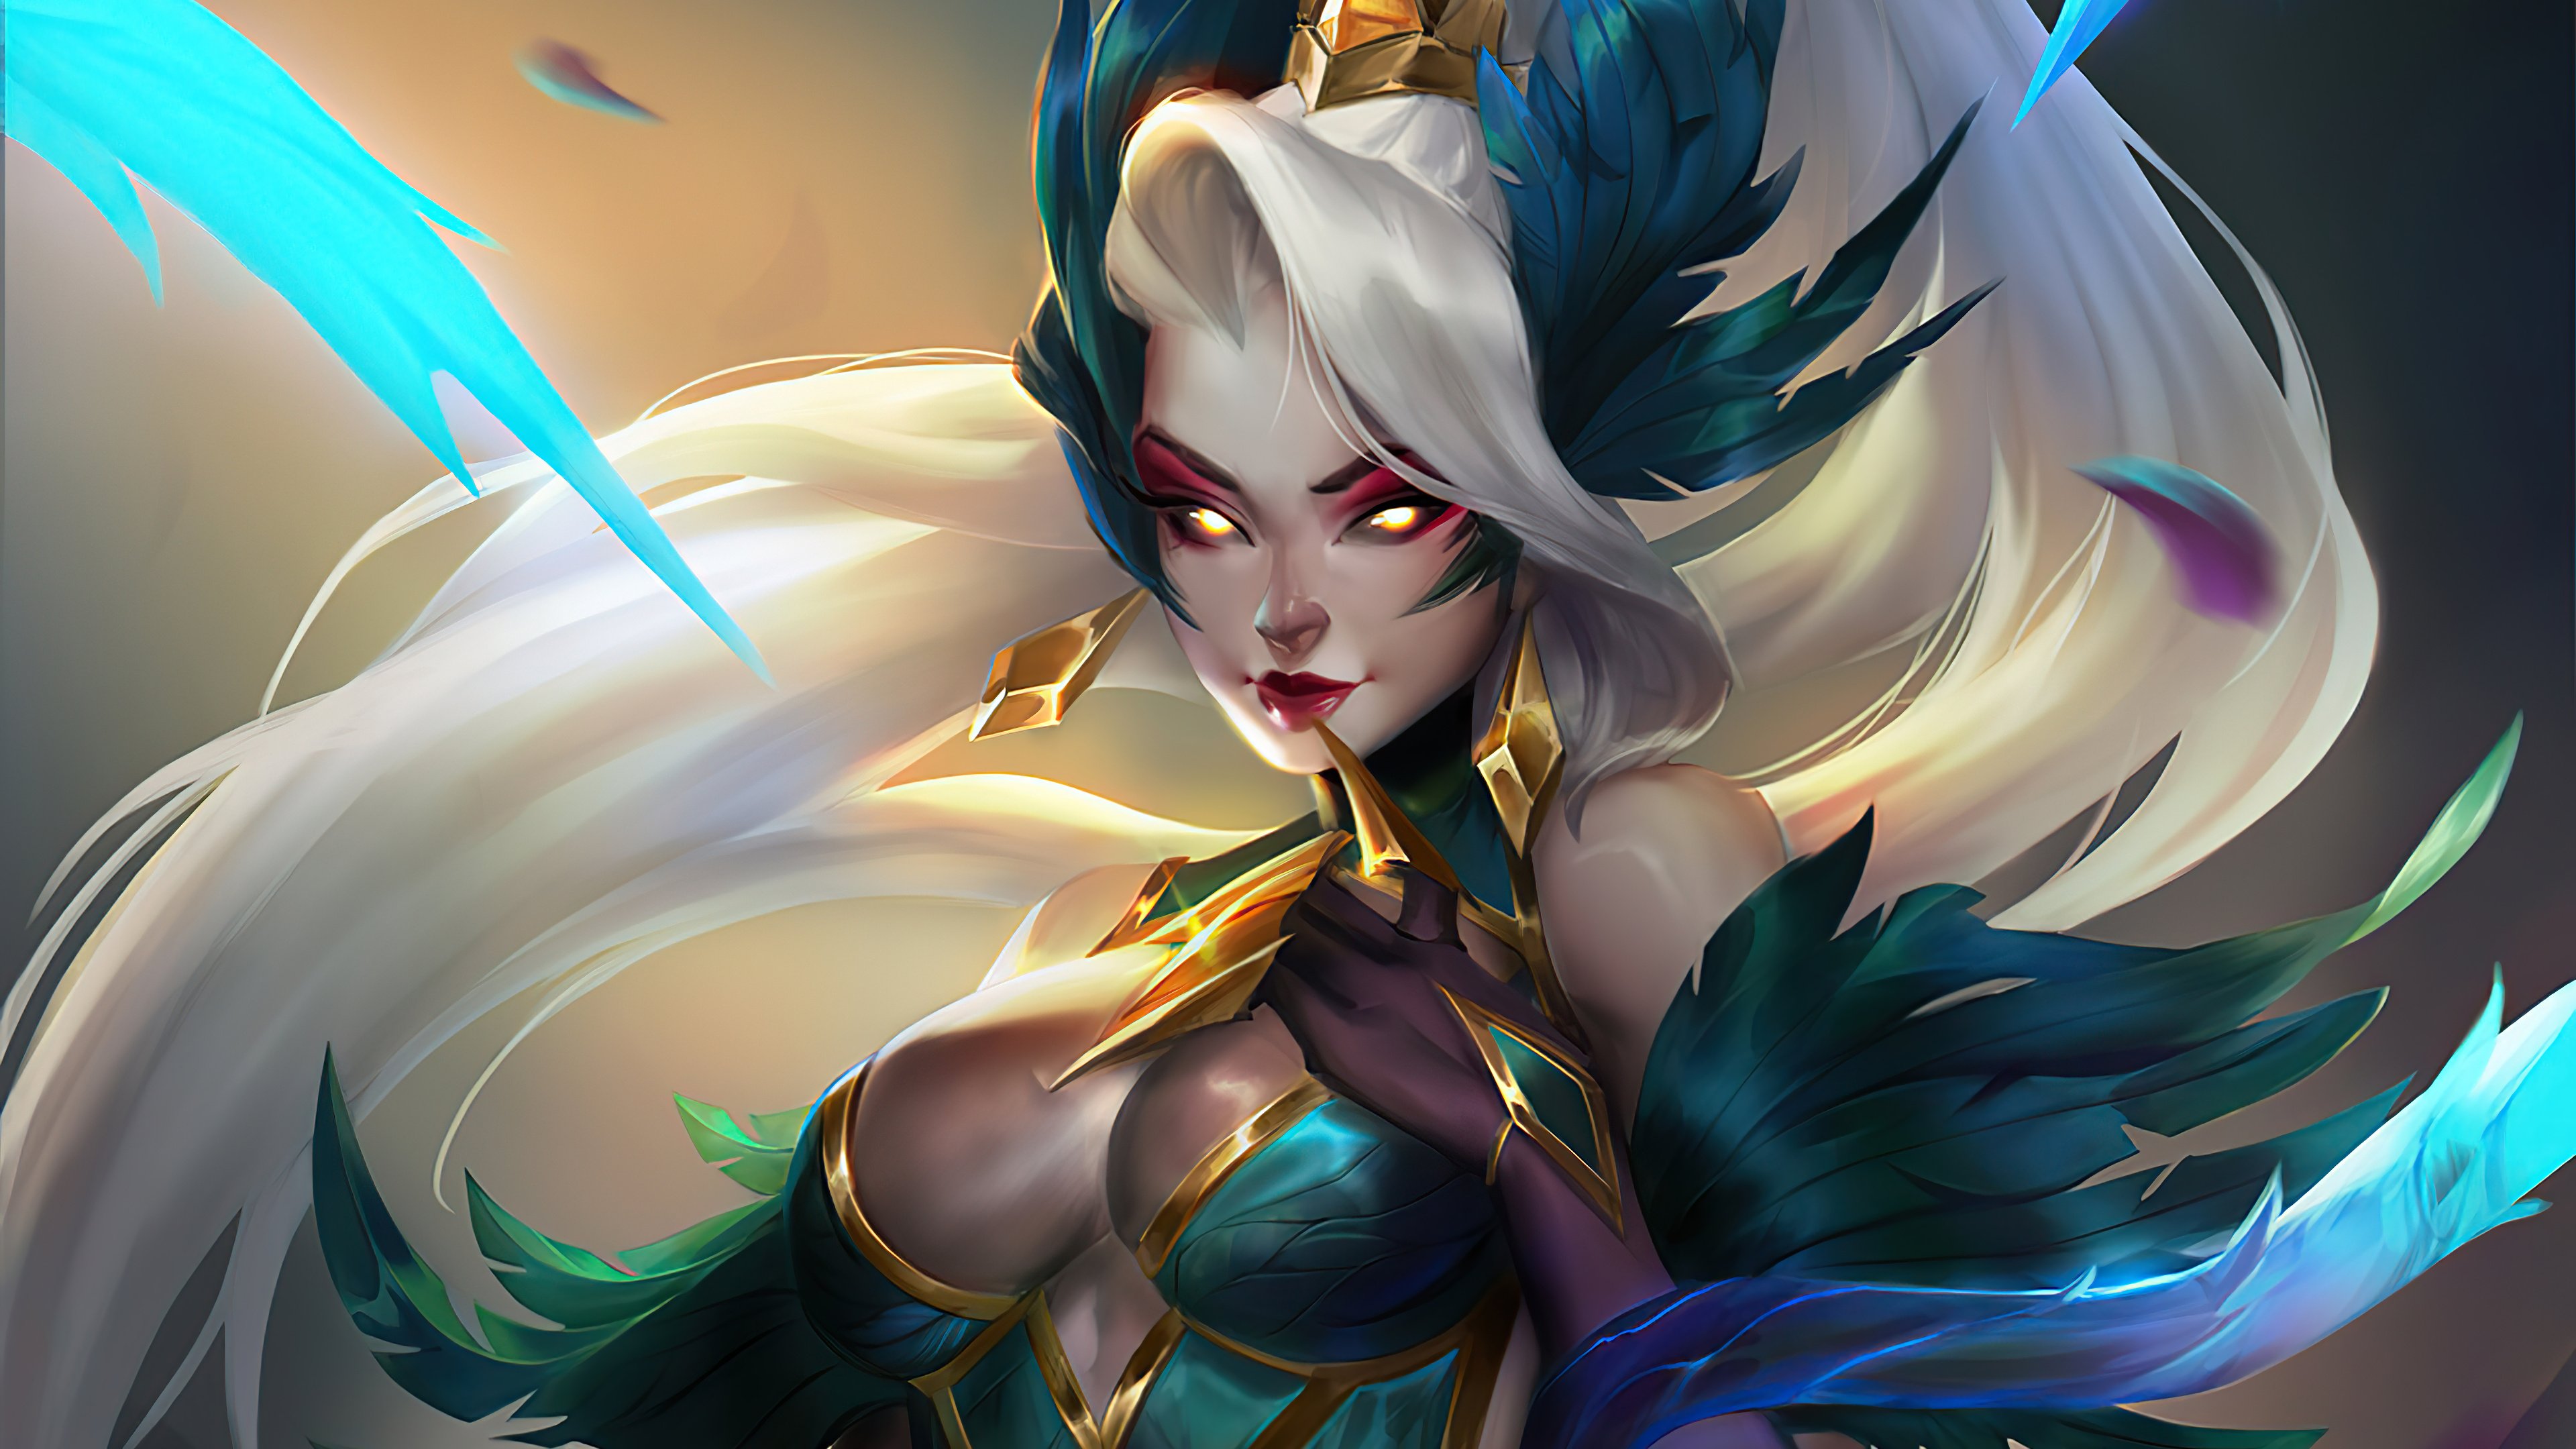 Wallpaper Coven from League of Legends